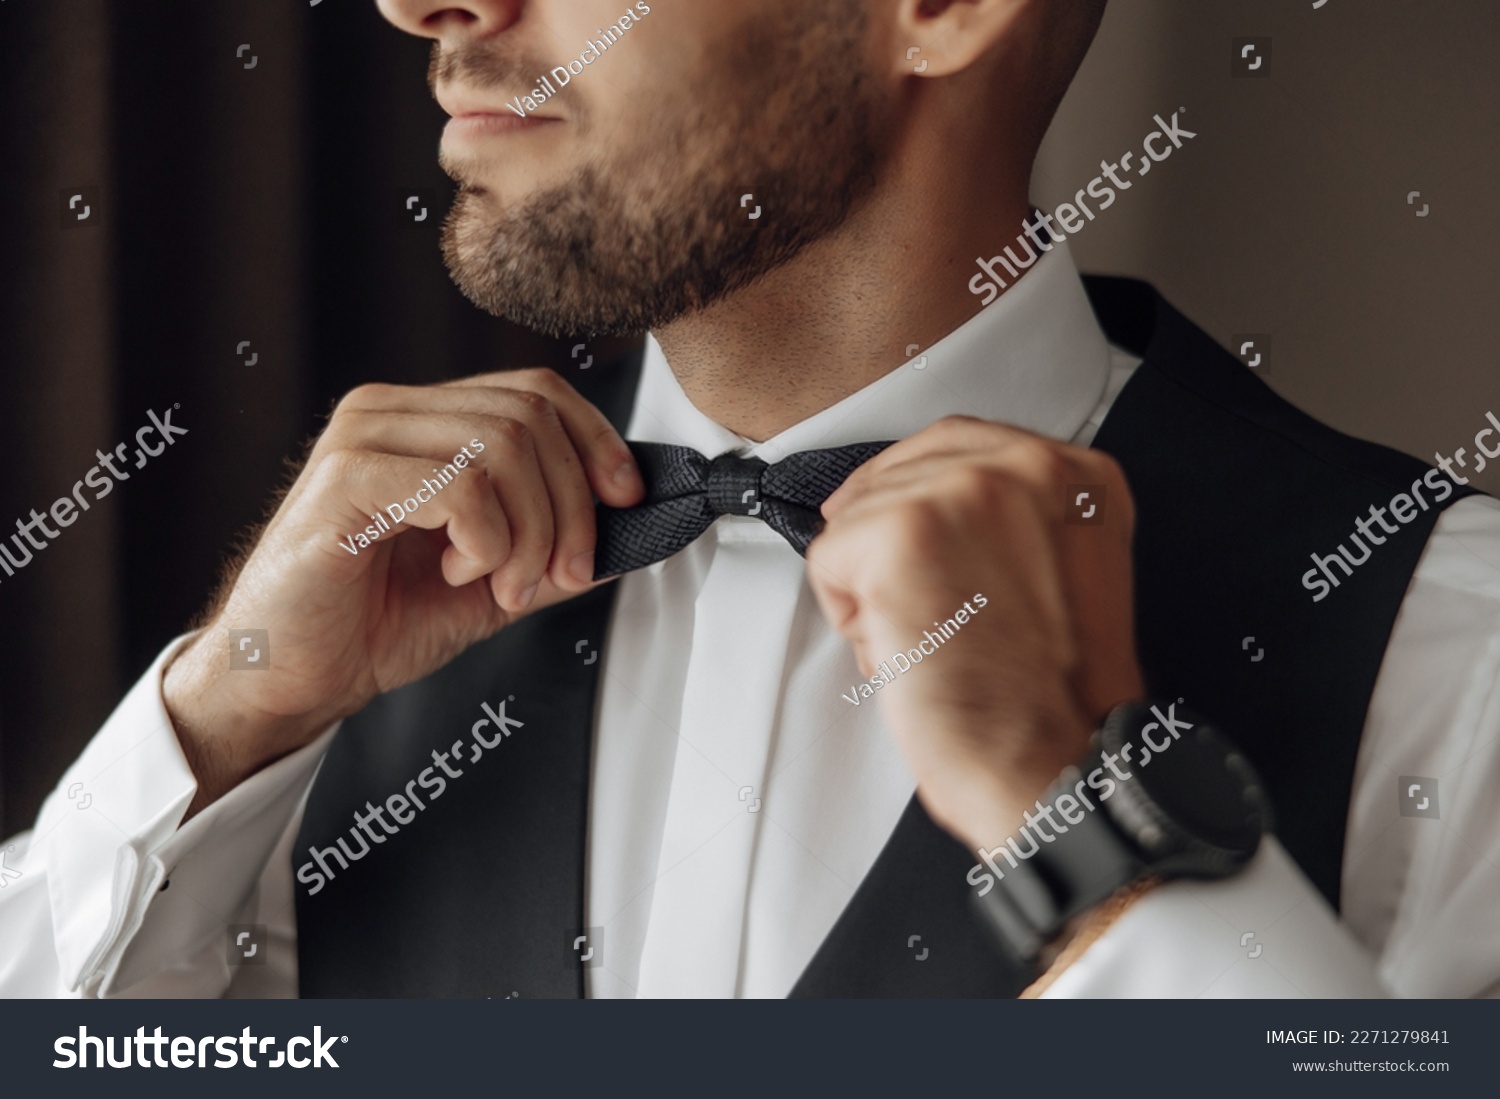 The stylish bridegroom dresses, prepares for the wedding ceremony. The groom's morning. Businessman wears a jacket, male hands closeup, groom getting ready in the morning before wedding ceremony #2271279841